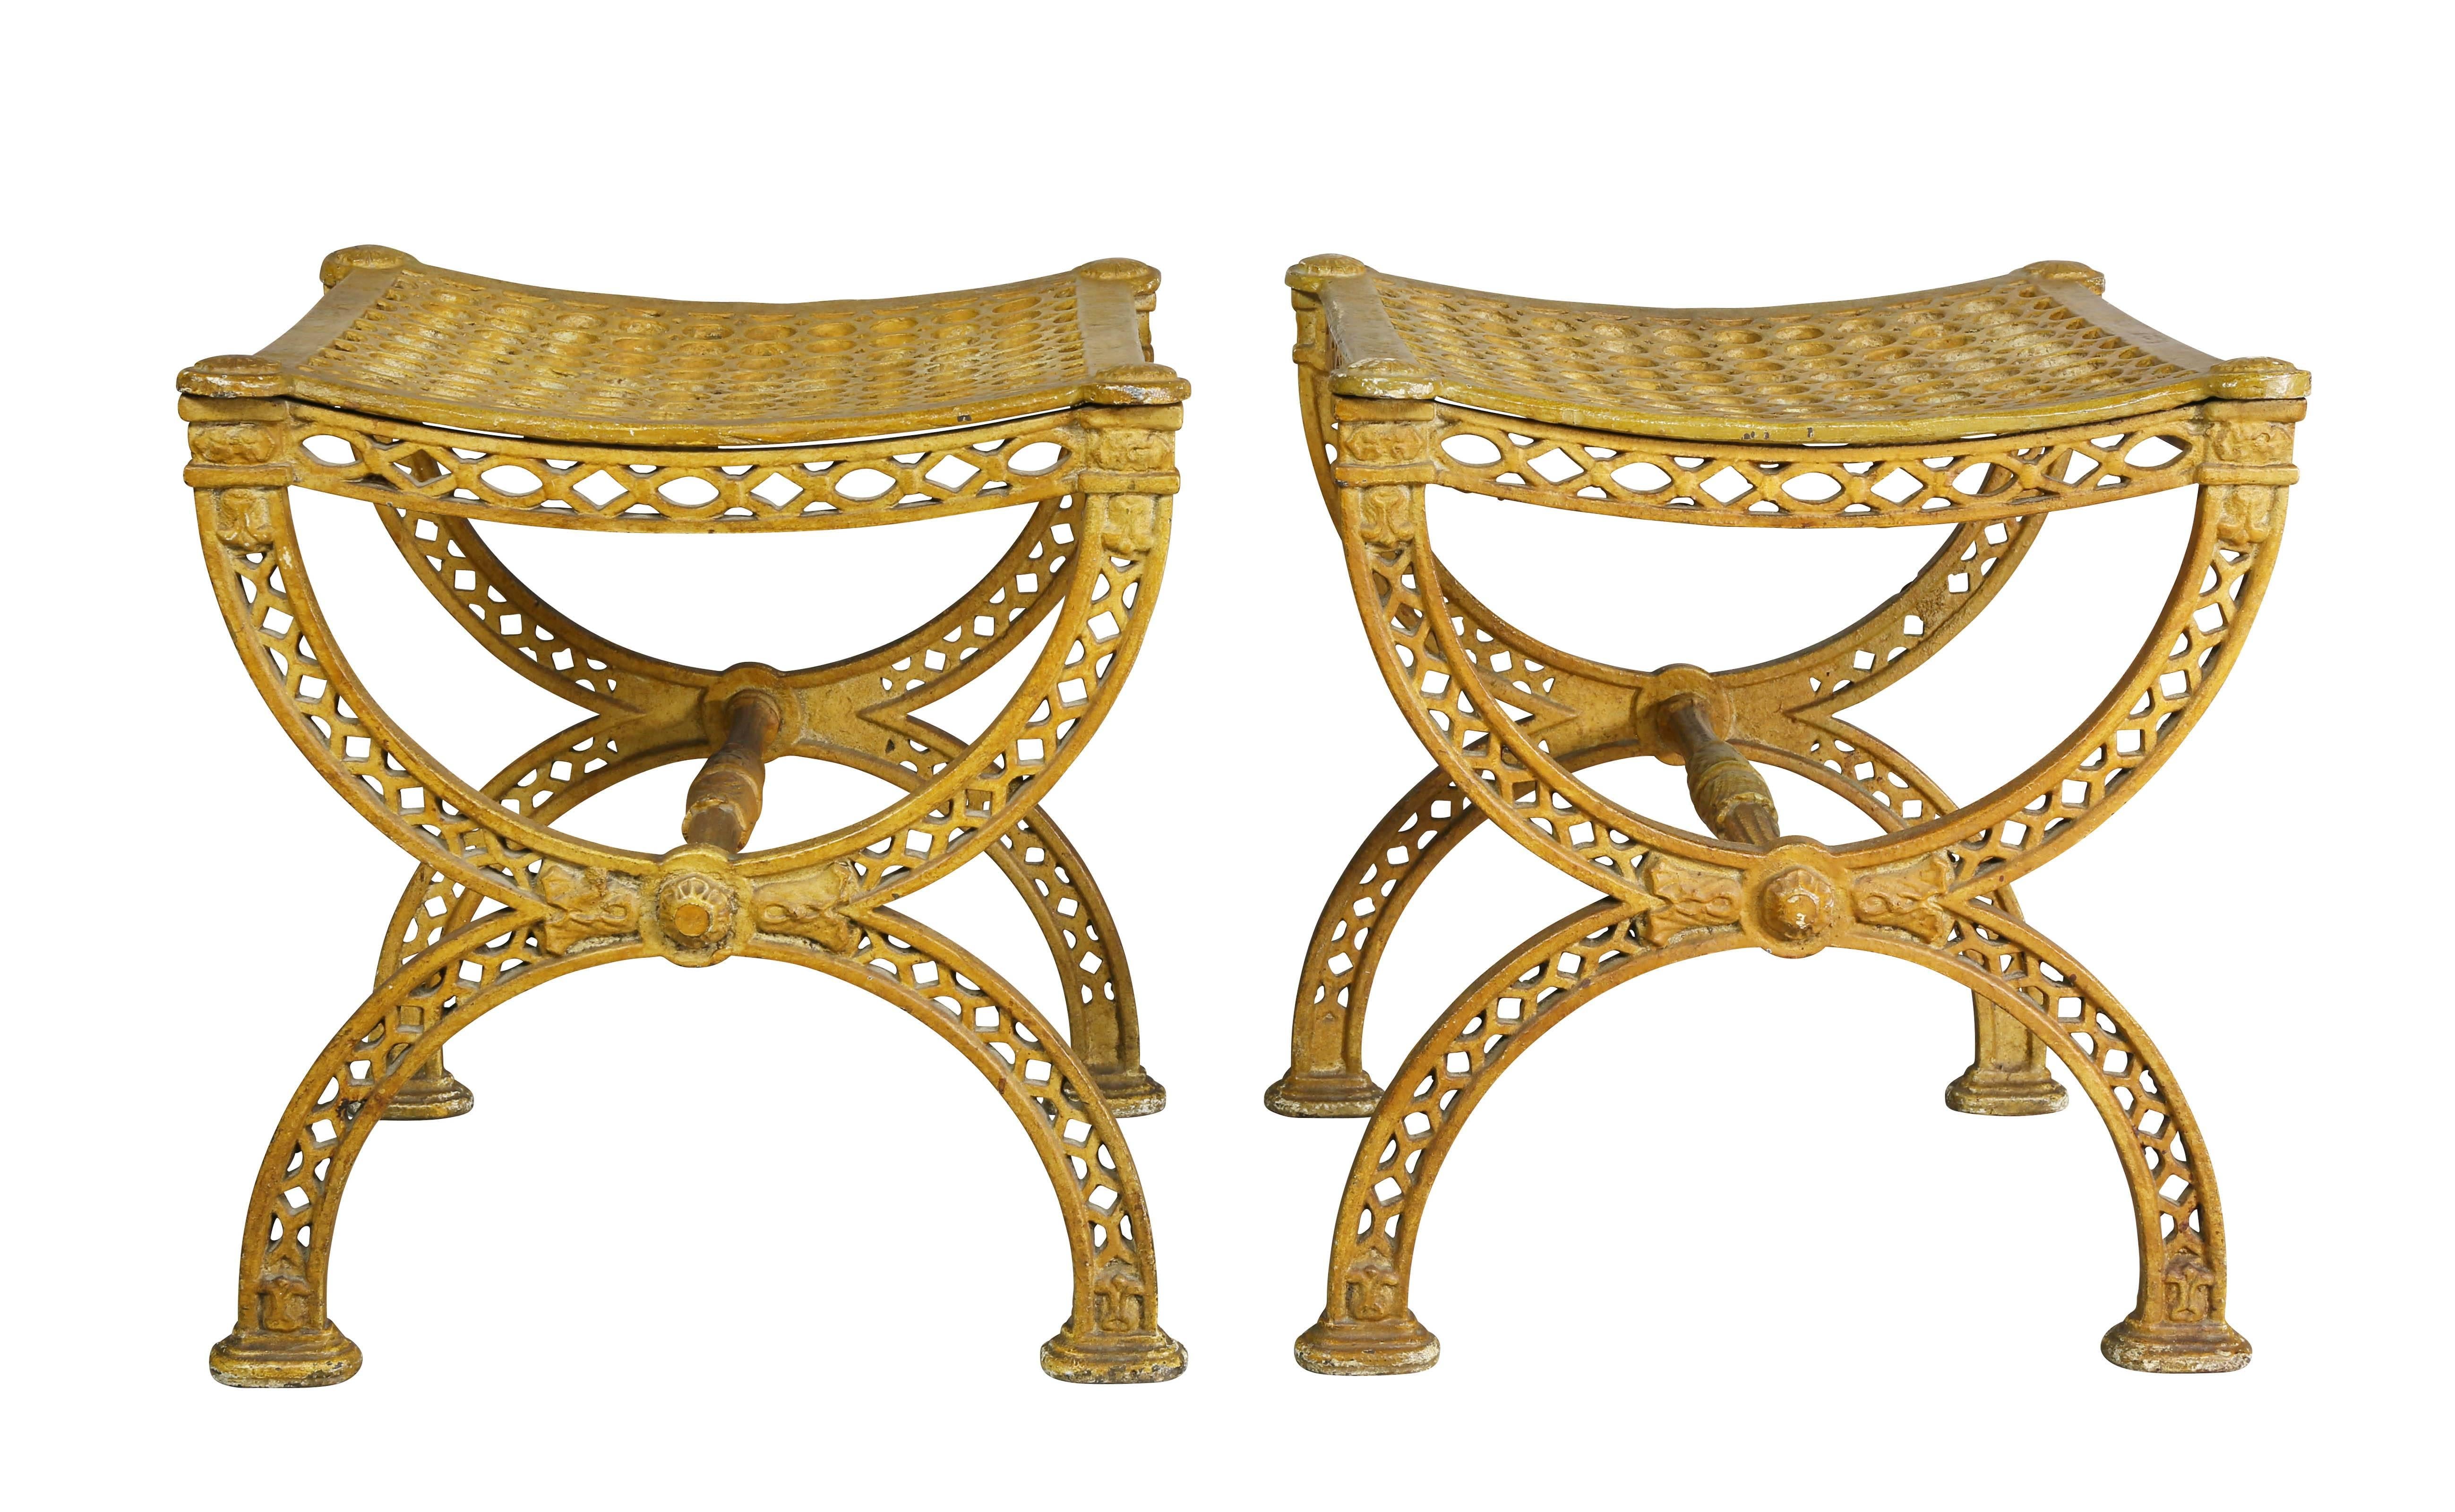 Neoclassical Revival Pair of Neoclassic Yellow Painted Cast Iron Stools